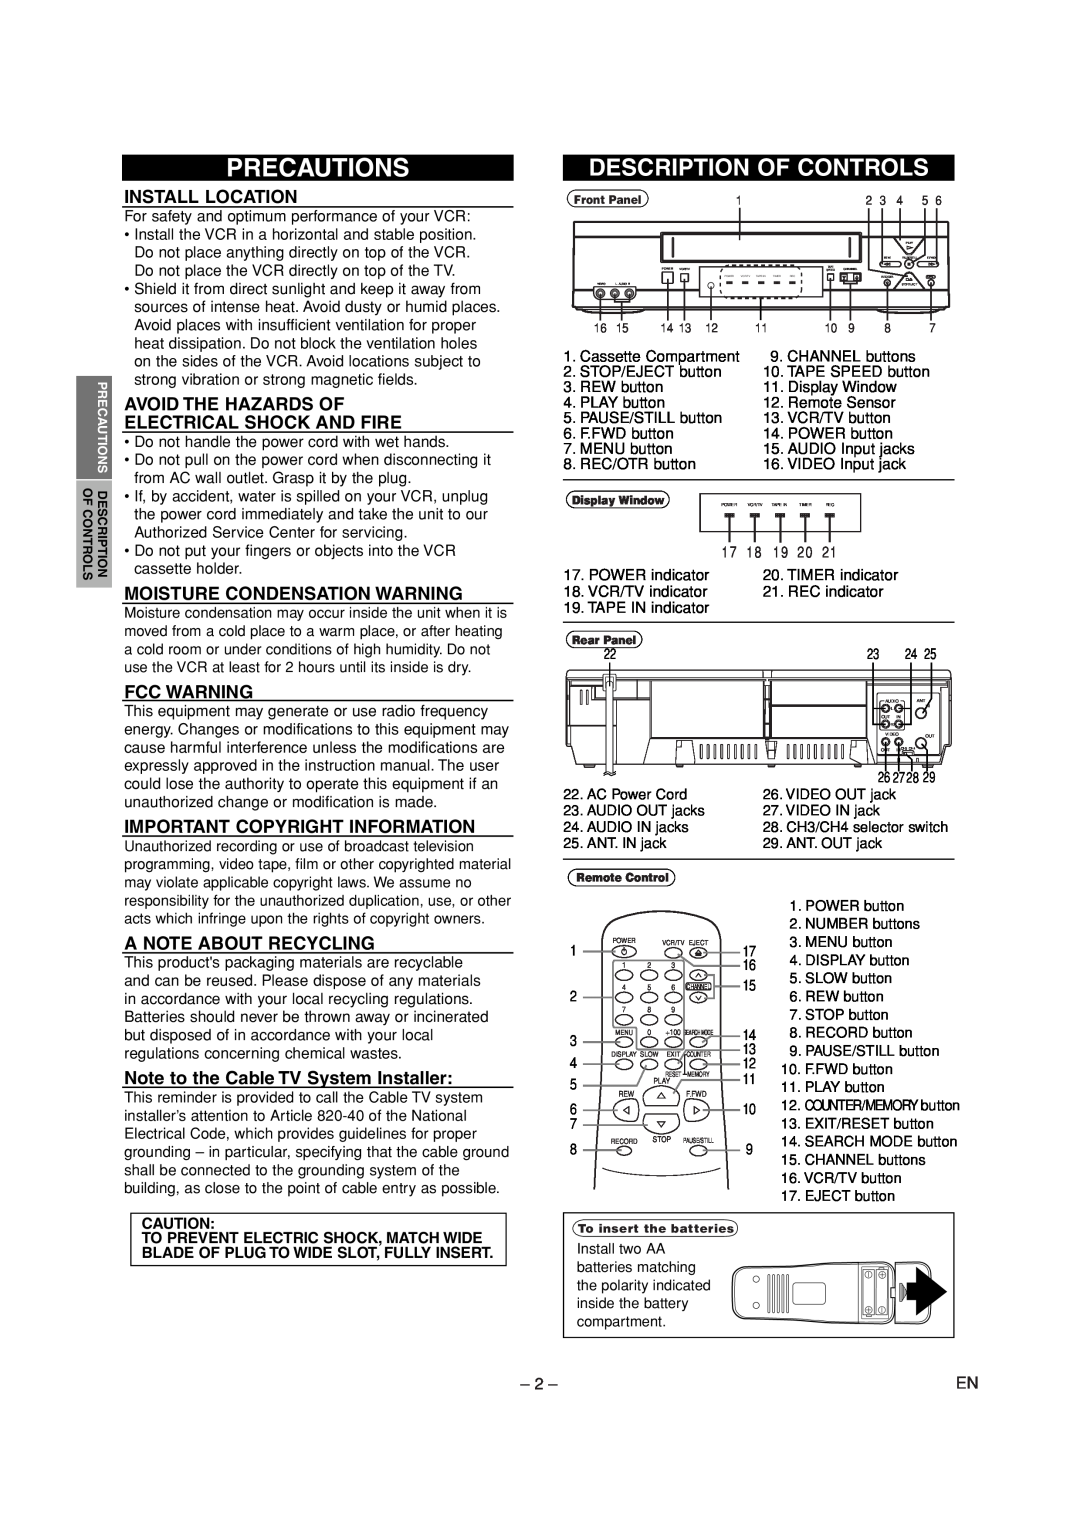 Sylvania 6262CVC owner manual Precautions, Install Location, Avoid The Hazards Of Electrical Shock And Fire, Fcc Warning 